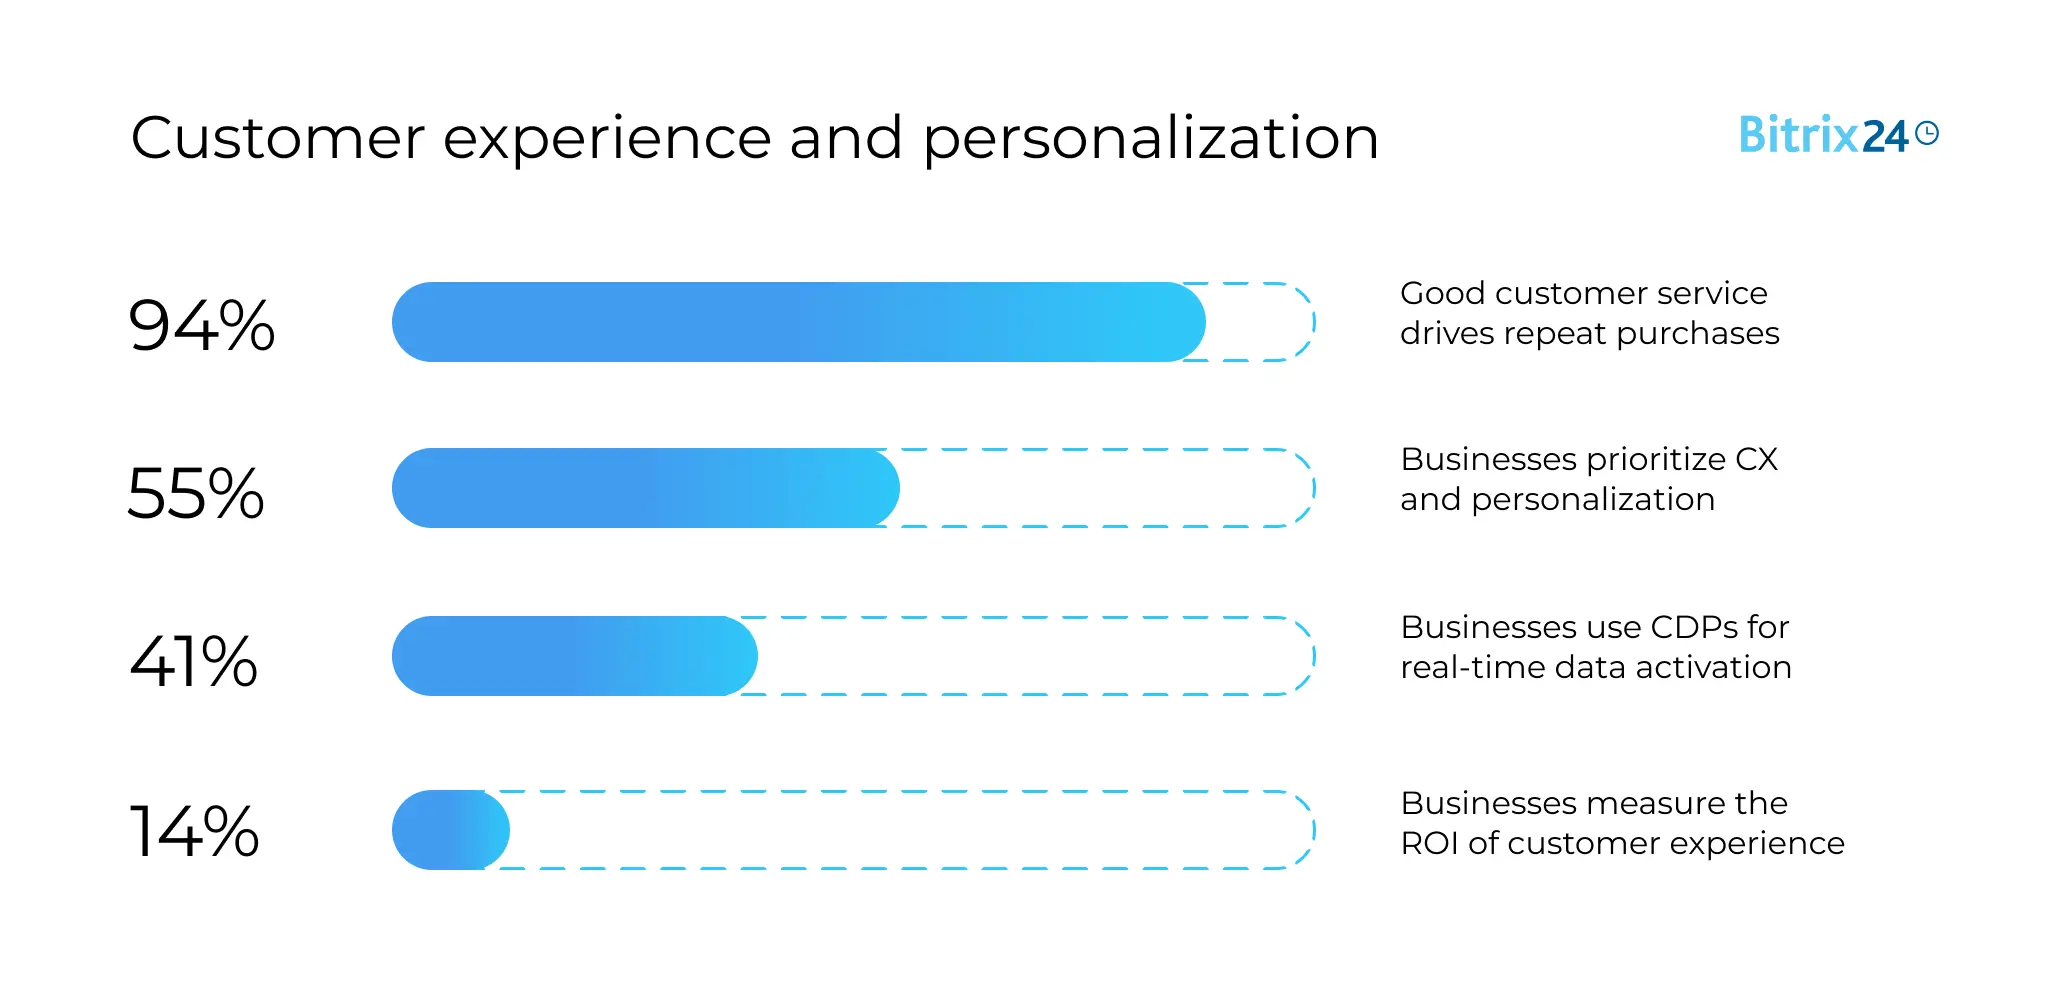 Customer experience and personalization